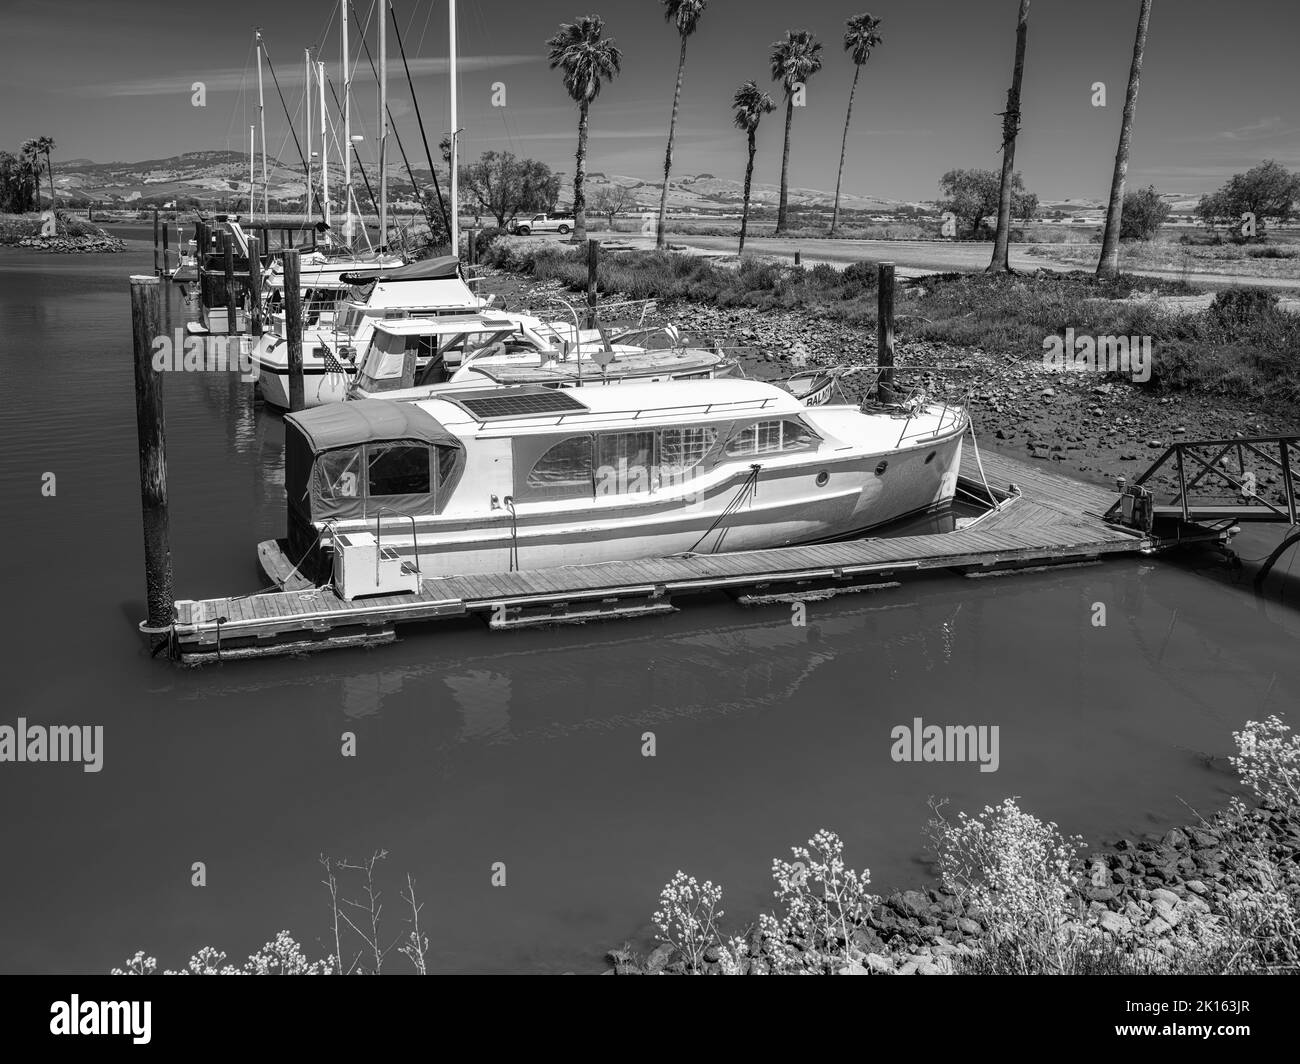 Boats in the harbour, Napa Valley Marina surrounded by palm trees & rolling hills background. Stock Photo